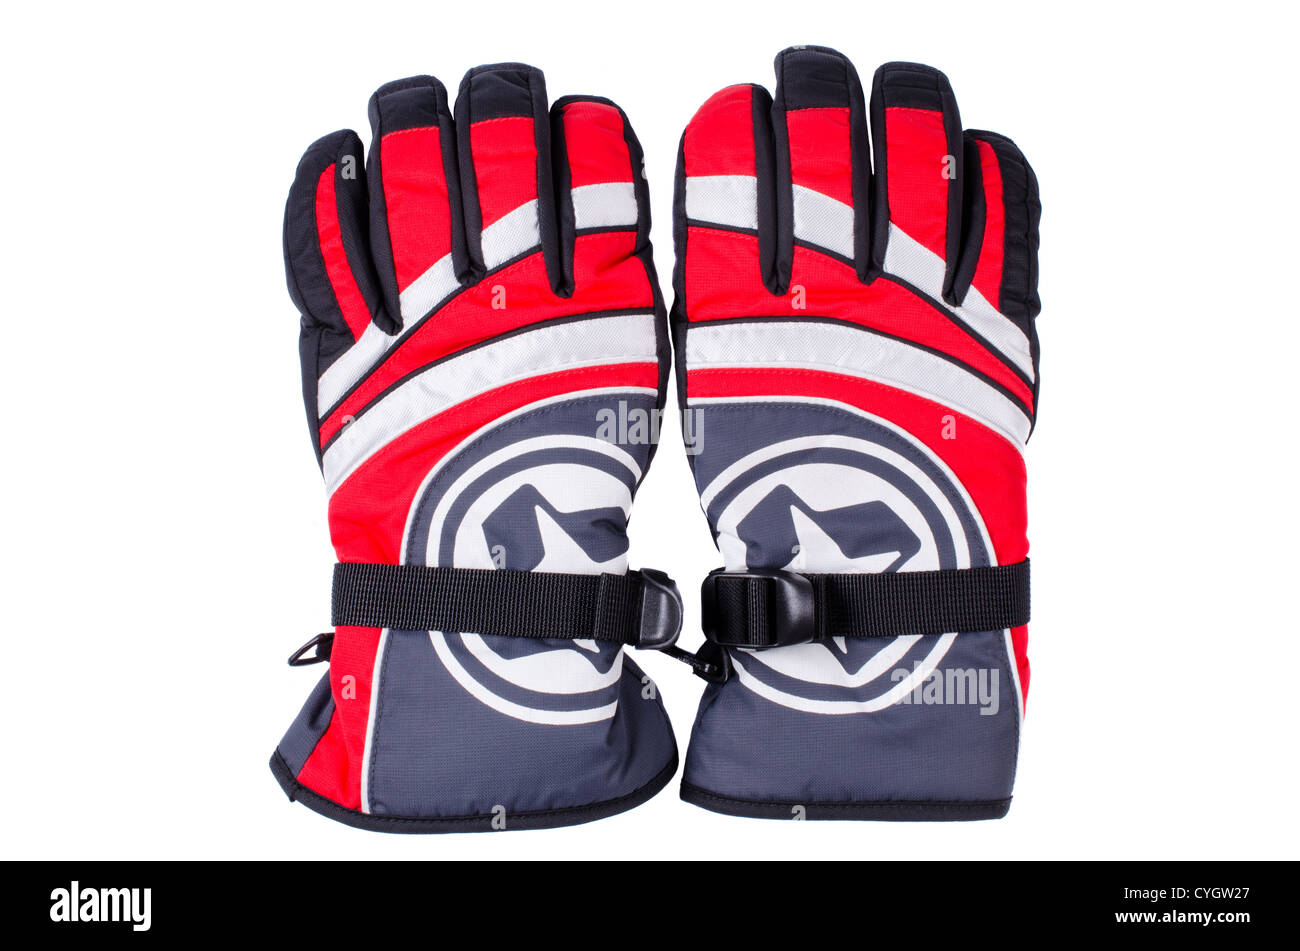 Pair of red white grey ski gloves isolated Stock Photo